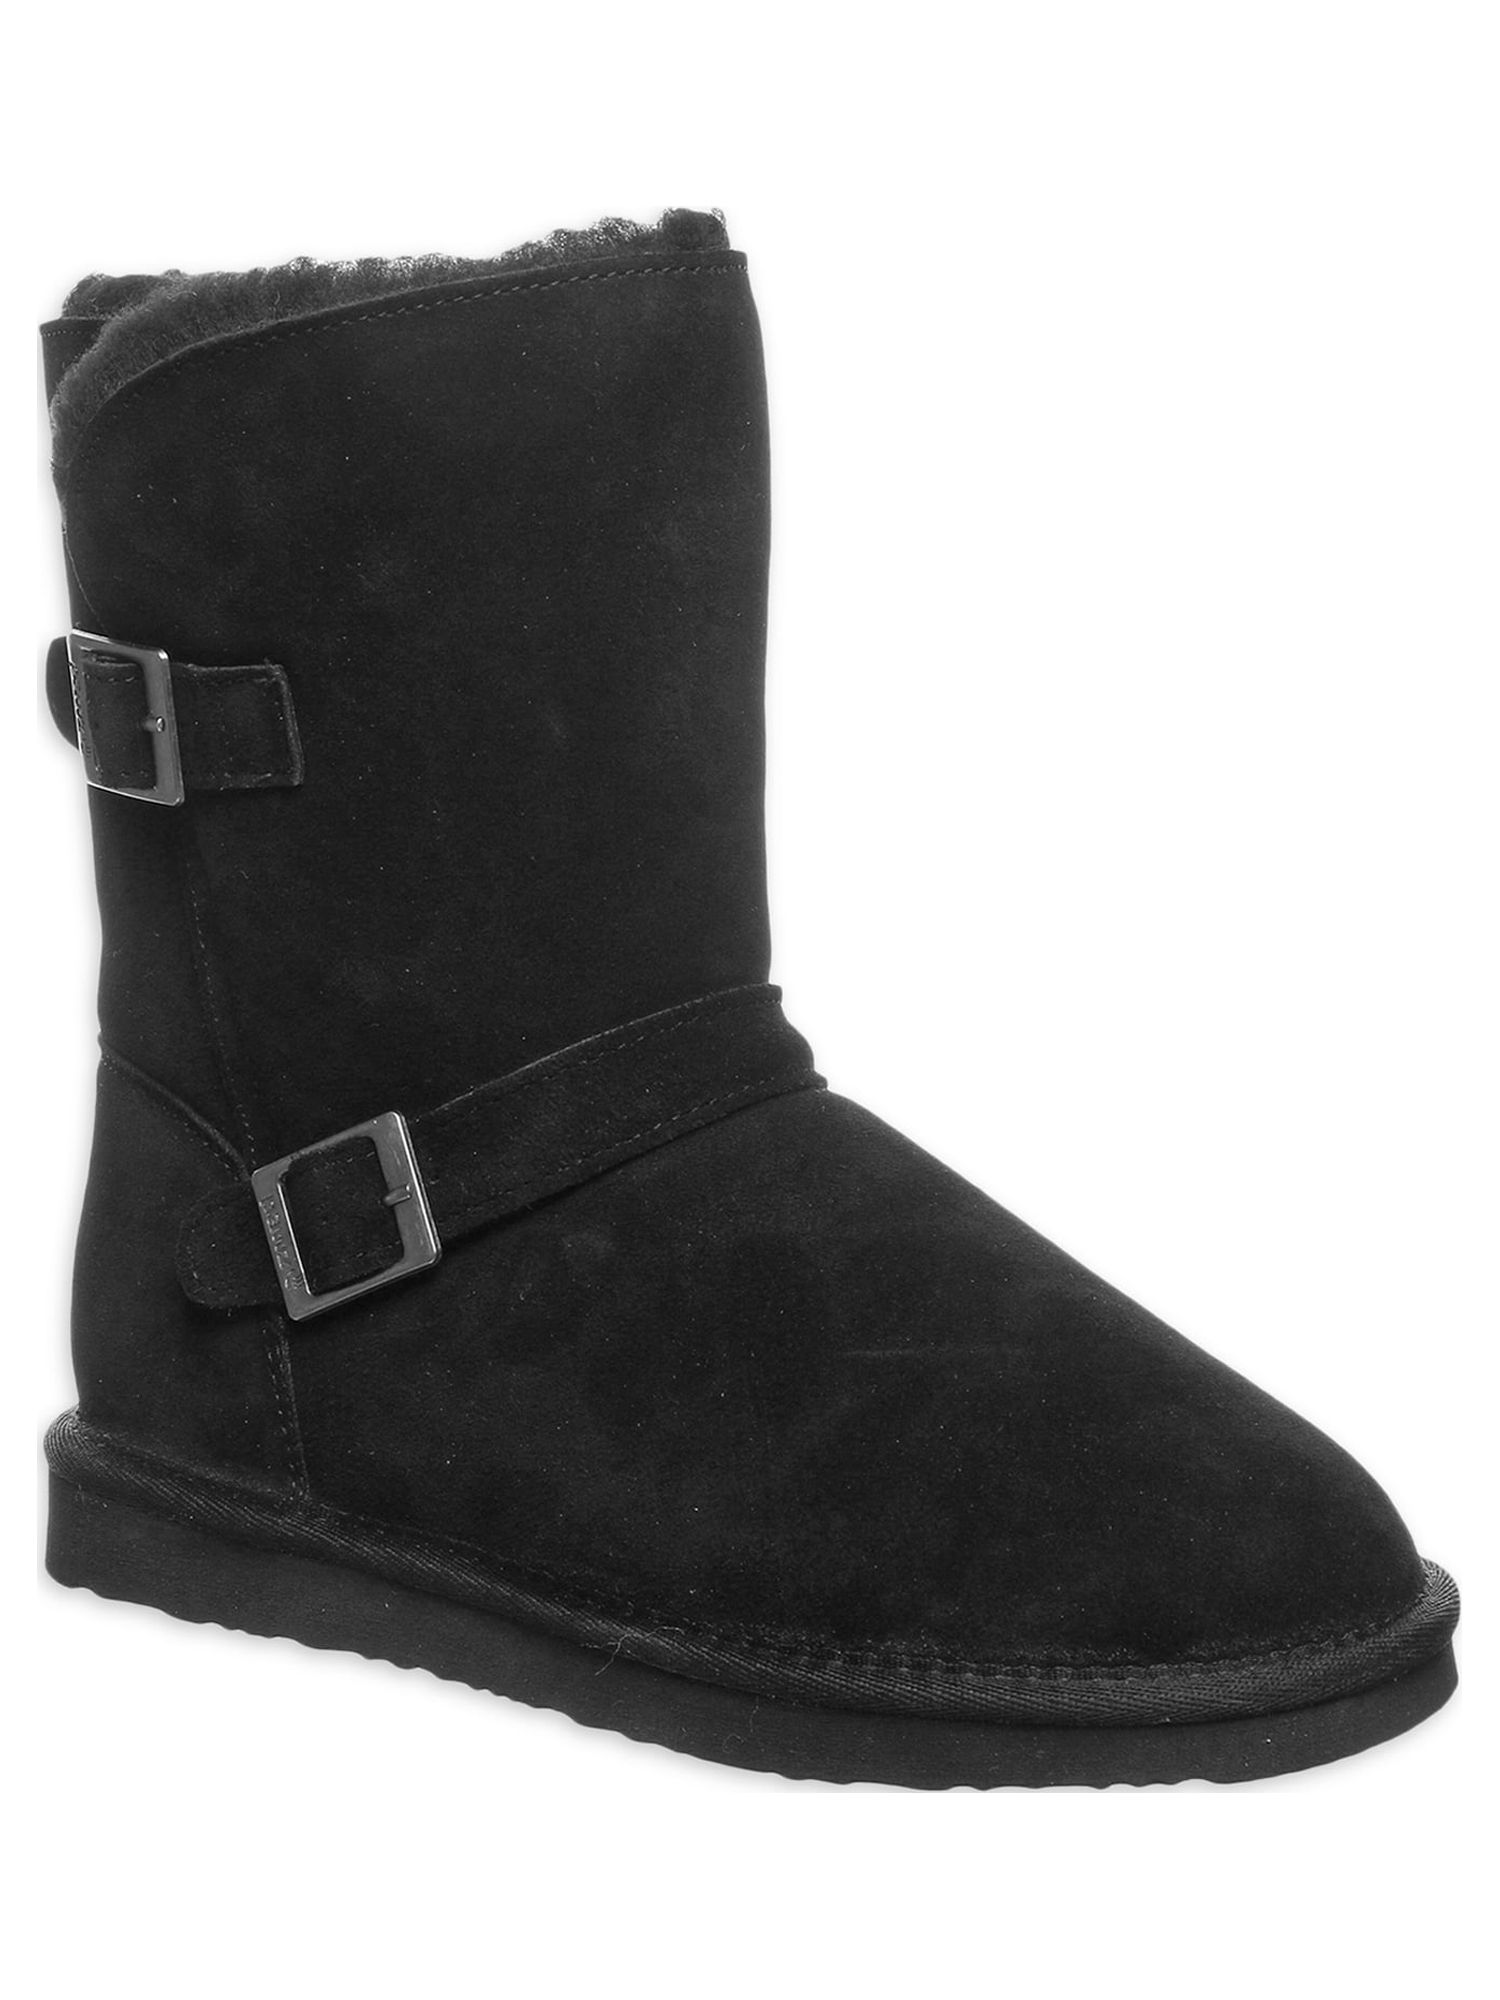 Pawz by Bearpaw Womens Camille Faux Fur Lined Suede Boot - image 1 of 5